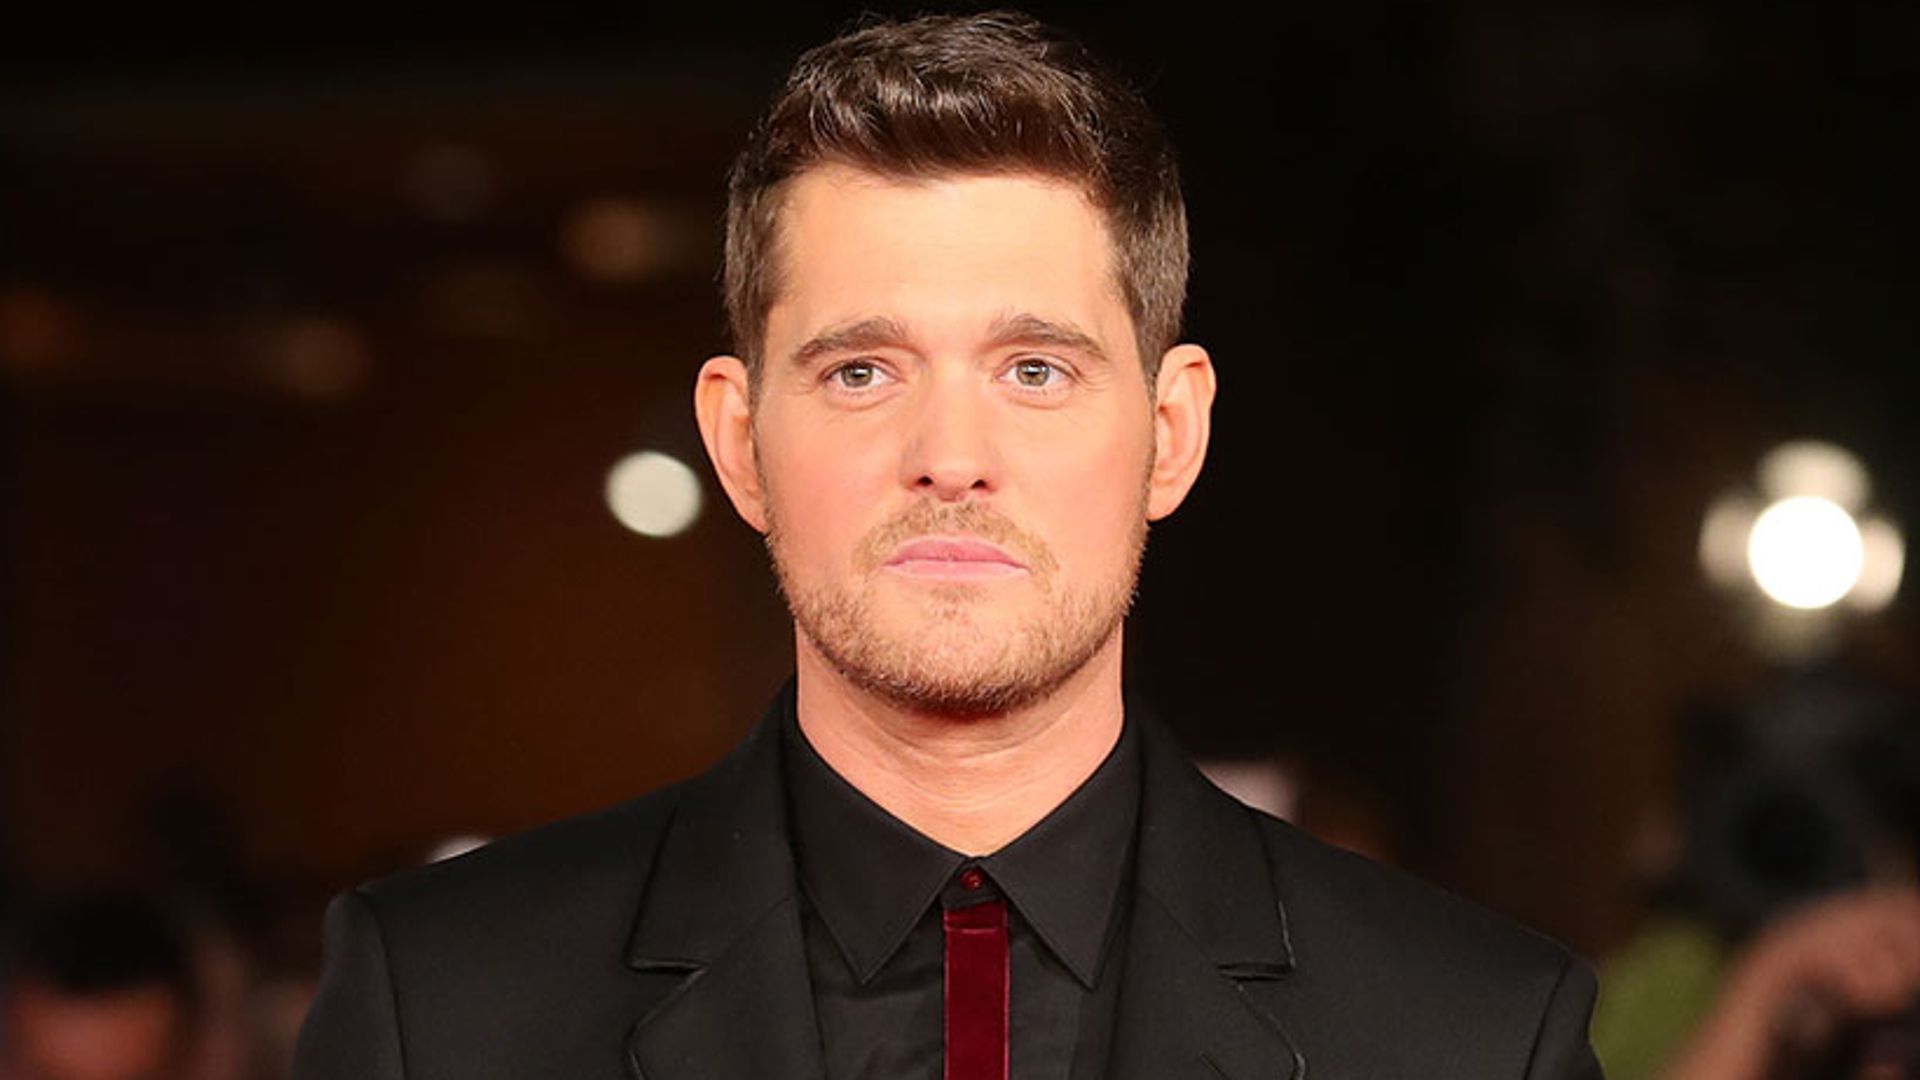 Michael Bublé rules out hosting Brits for second year running as son recovers from cancer